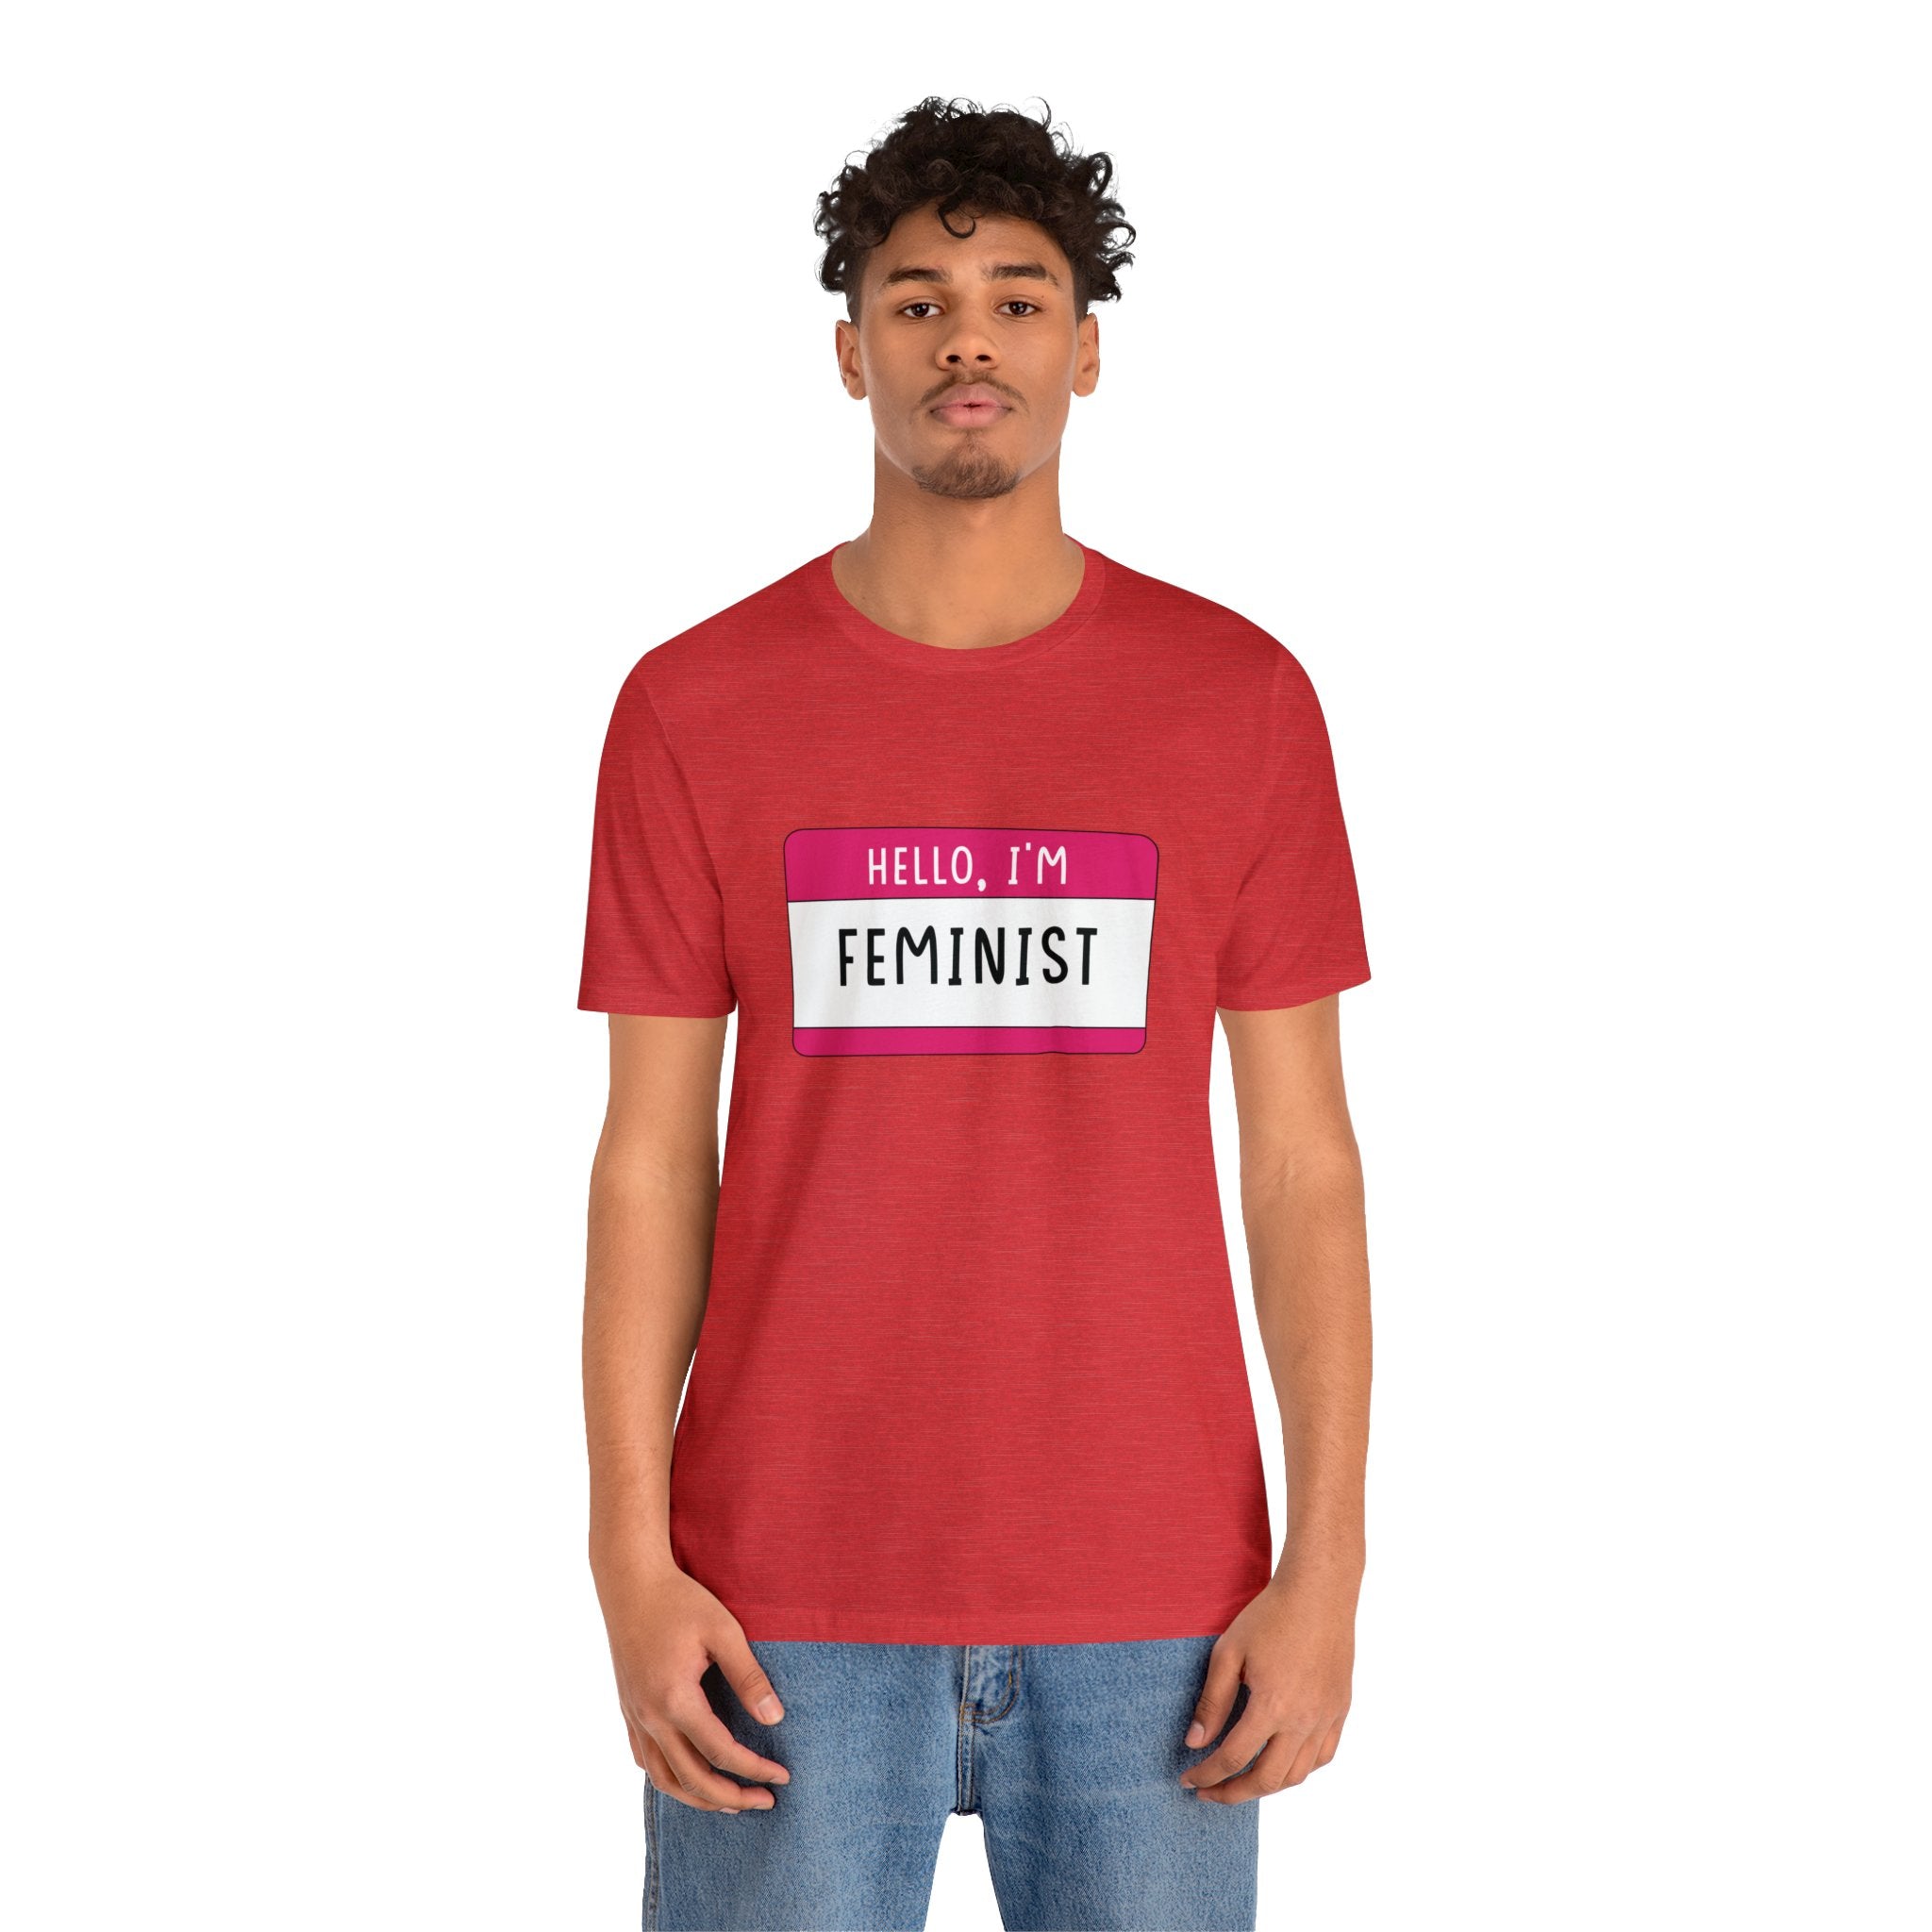 A young man in a red Hello, I'm Feminist T-Shirt stands facing the camera.